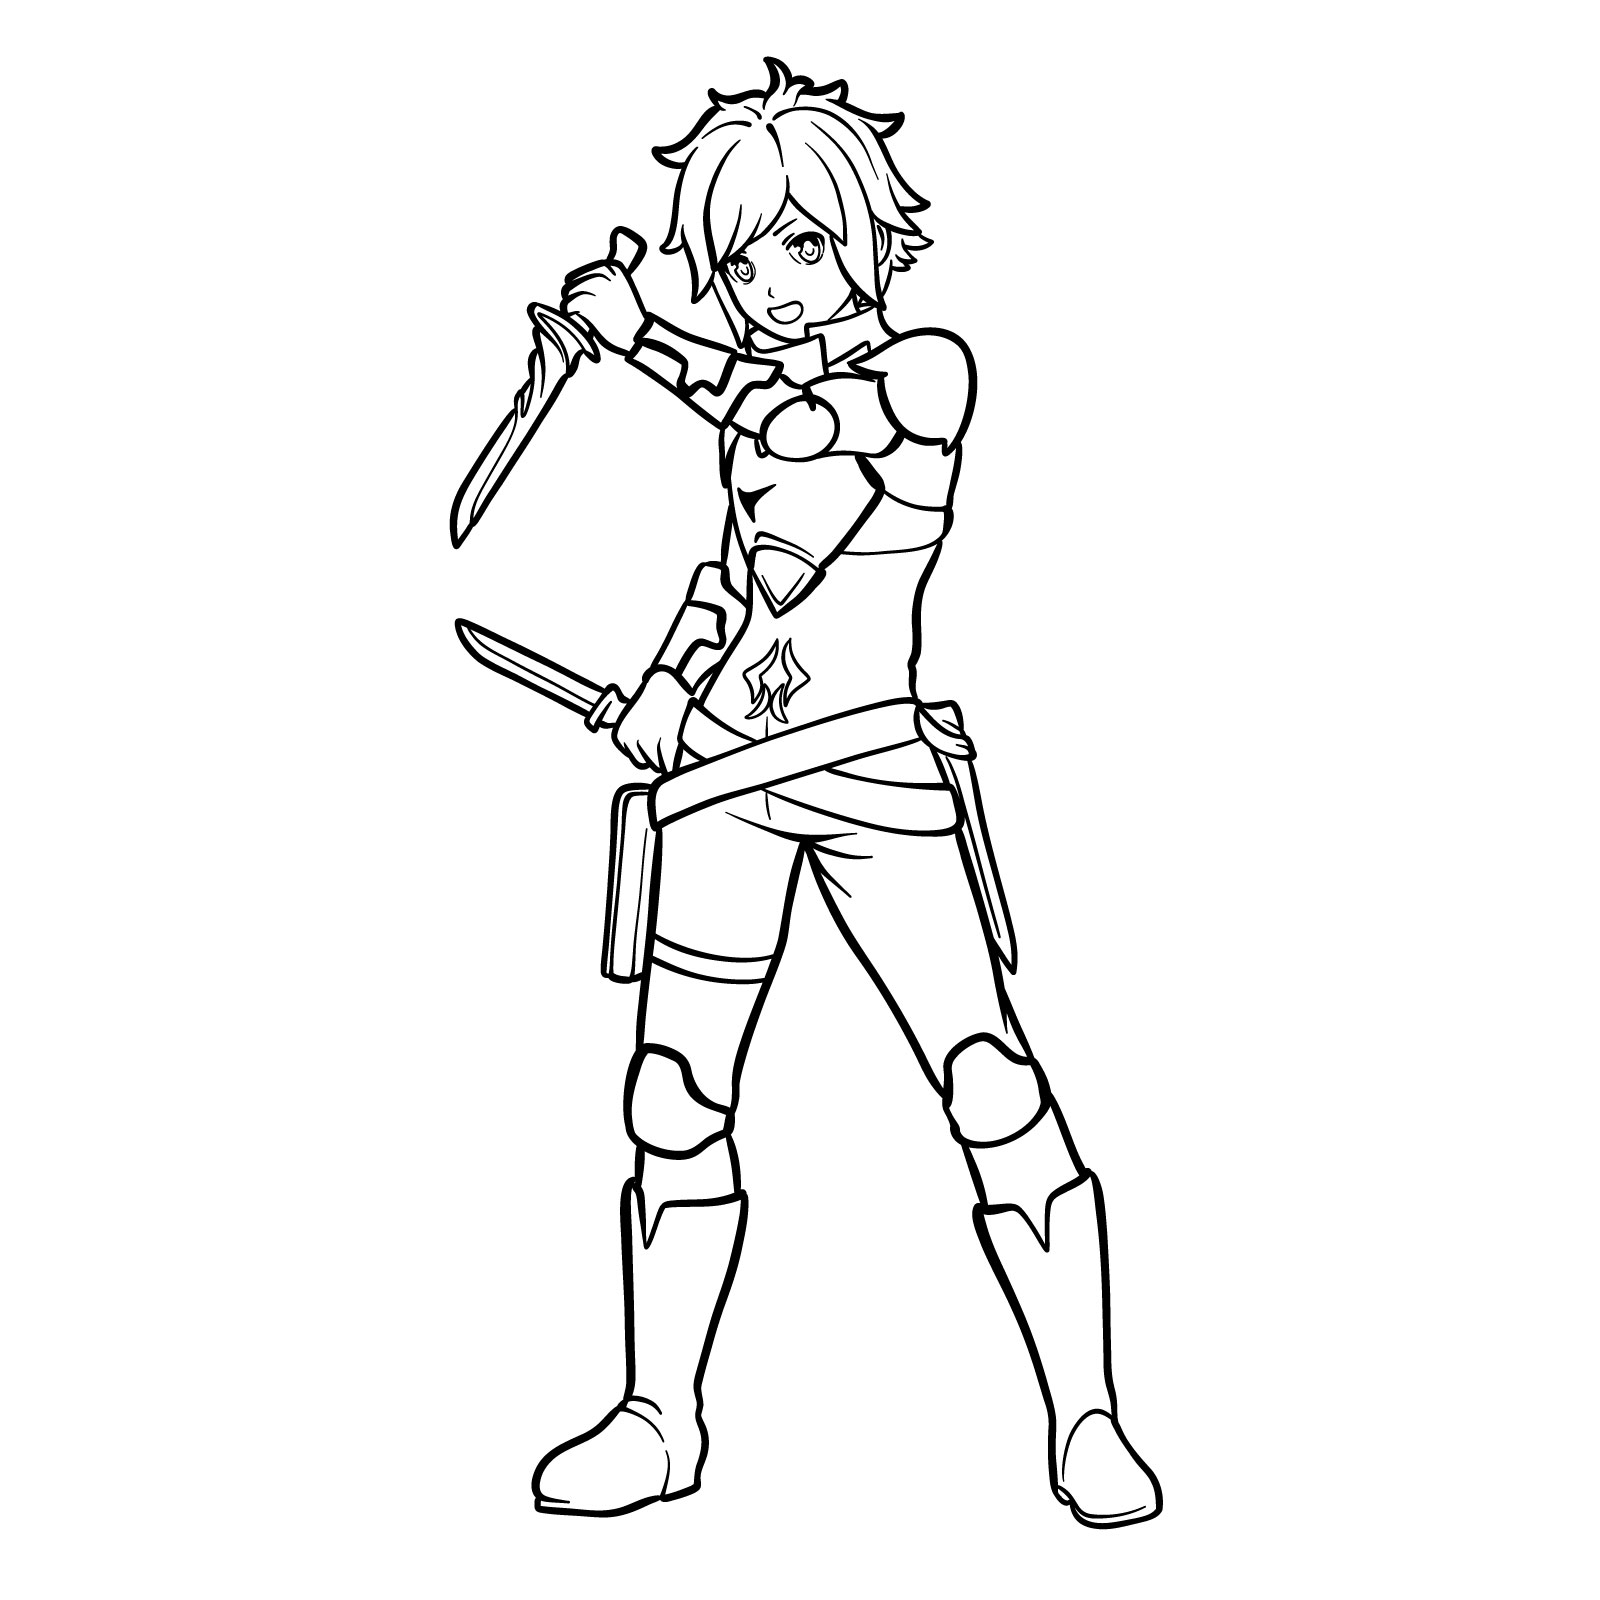 Sketching the Hero's Tale: How to Draw Bell Cranel from DanMachi